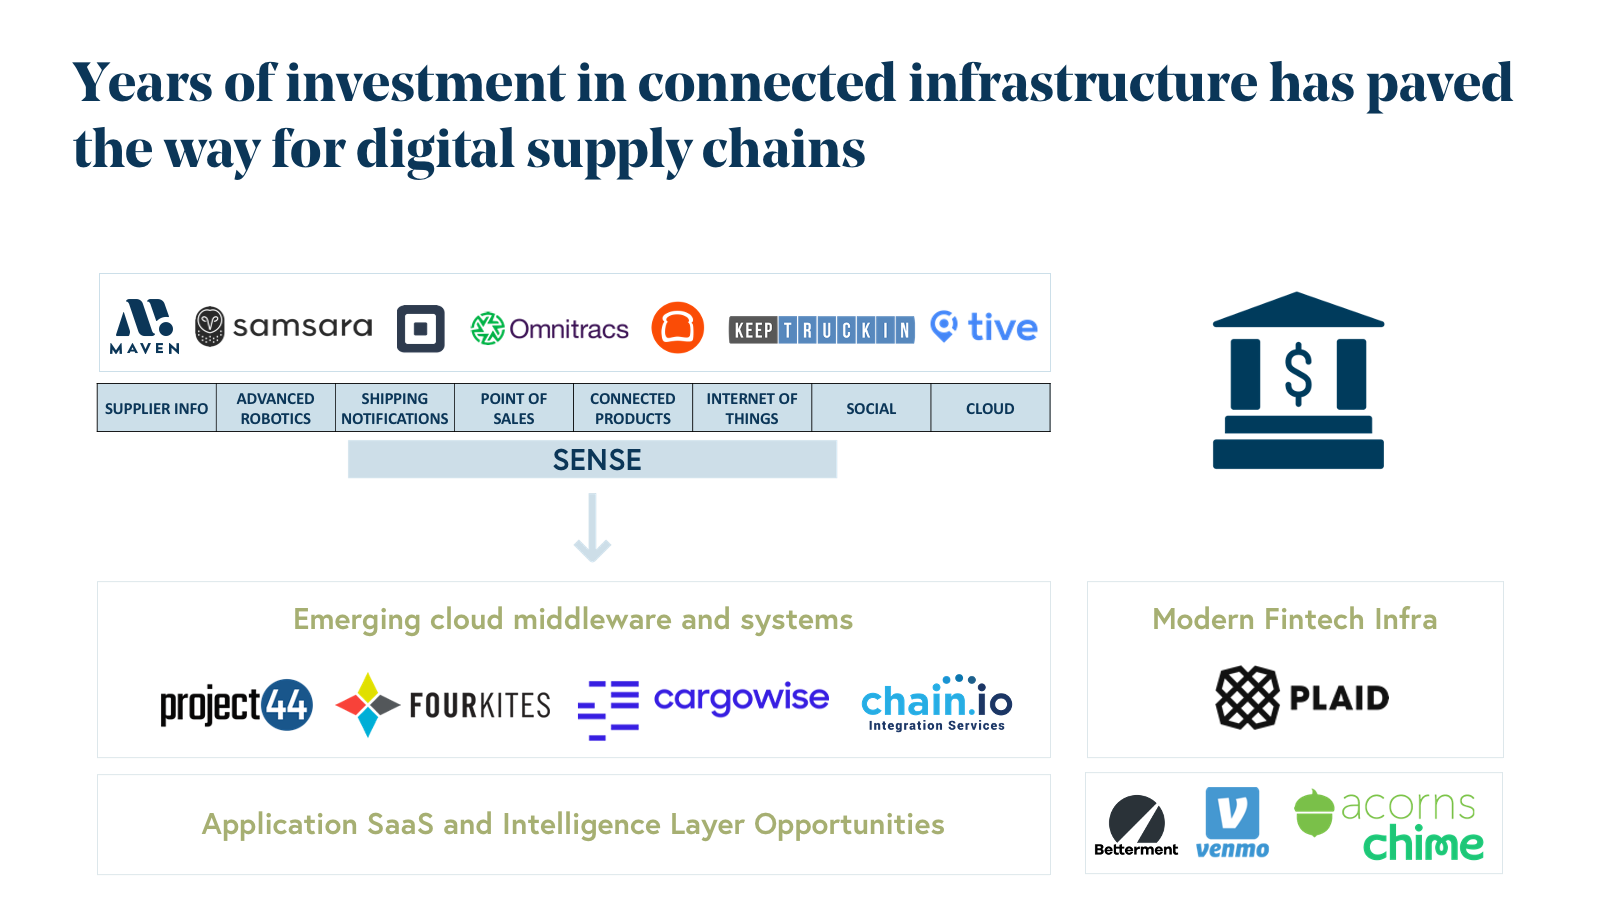 Years of investment in connected infrastructure 